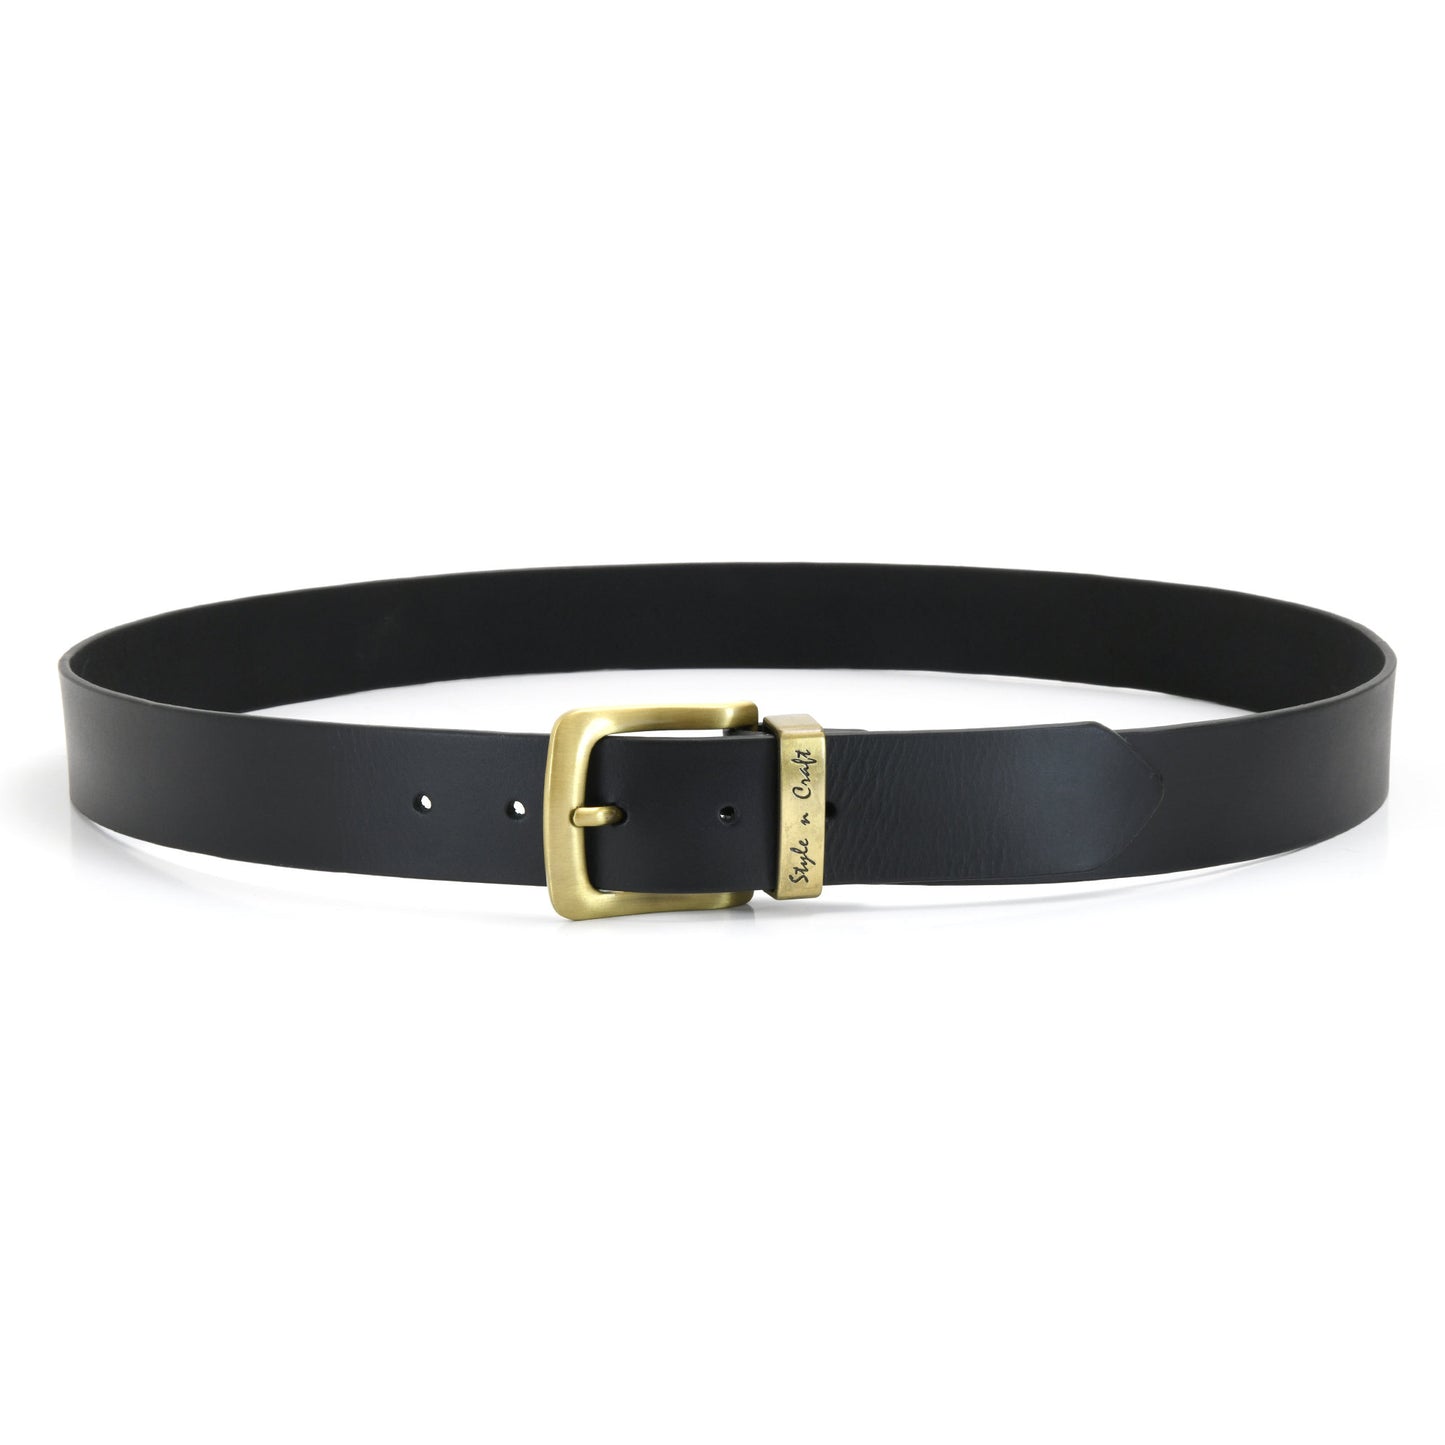 392711 - one and a half inch wide leather belt in black color full grain leather with matte gold finish metal buckle & loop - front view 2